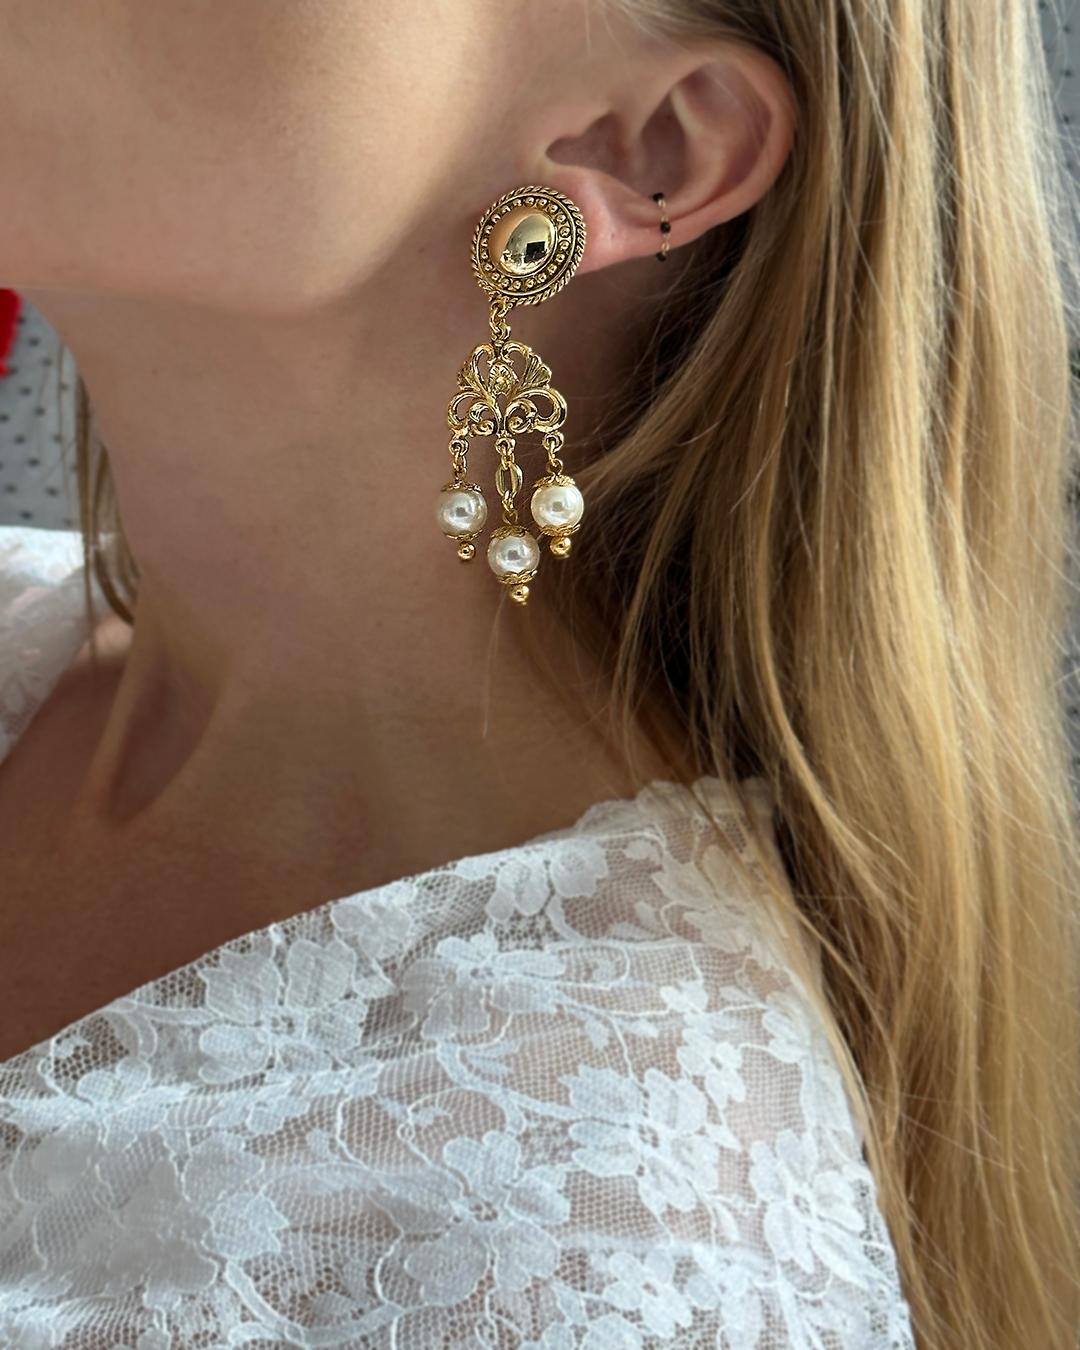 VERY BREEZY presents: These vintage pearl earrings are so dramatic and feminine at once; made in Europe, they immediately convey that romantic sensibility. They feature a baroque gilt motif, with three pearl drops. The classic gold and pearl